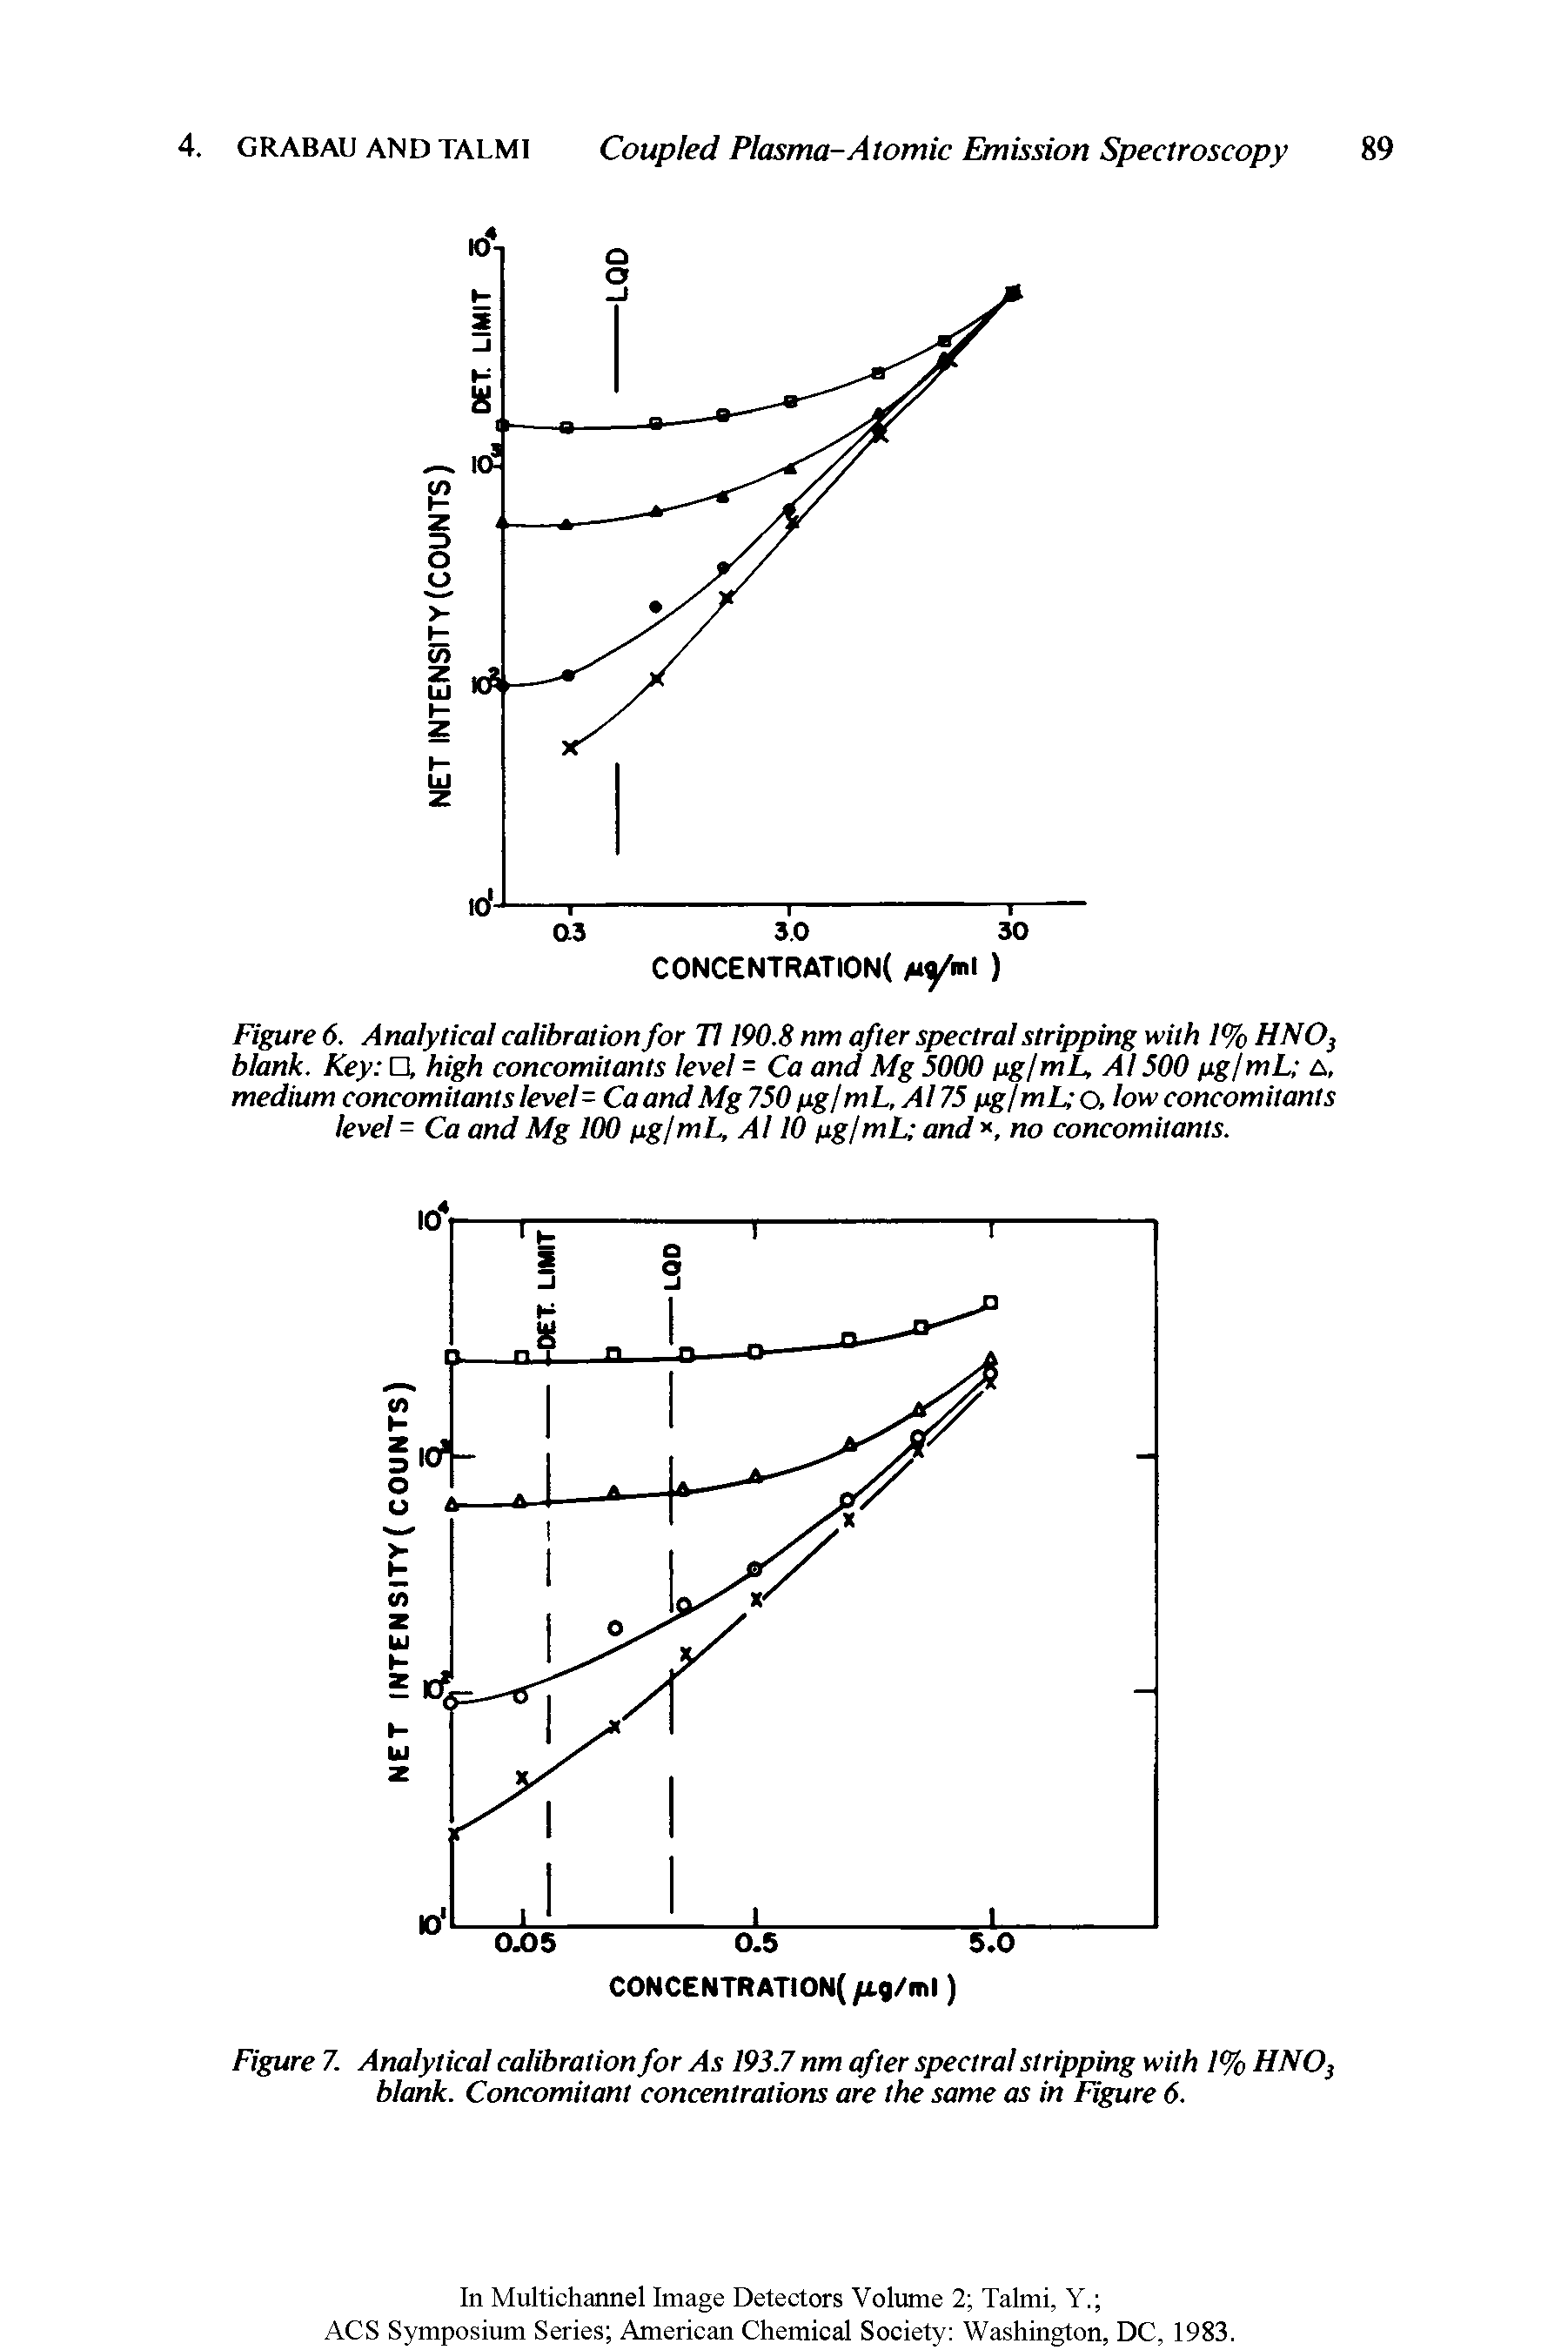 Figure 7. Analytical calibration for As 193.7 nm after spectral stripping with 1% HNO blank. Concomitant concentrations are the same as in Figure 6.